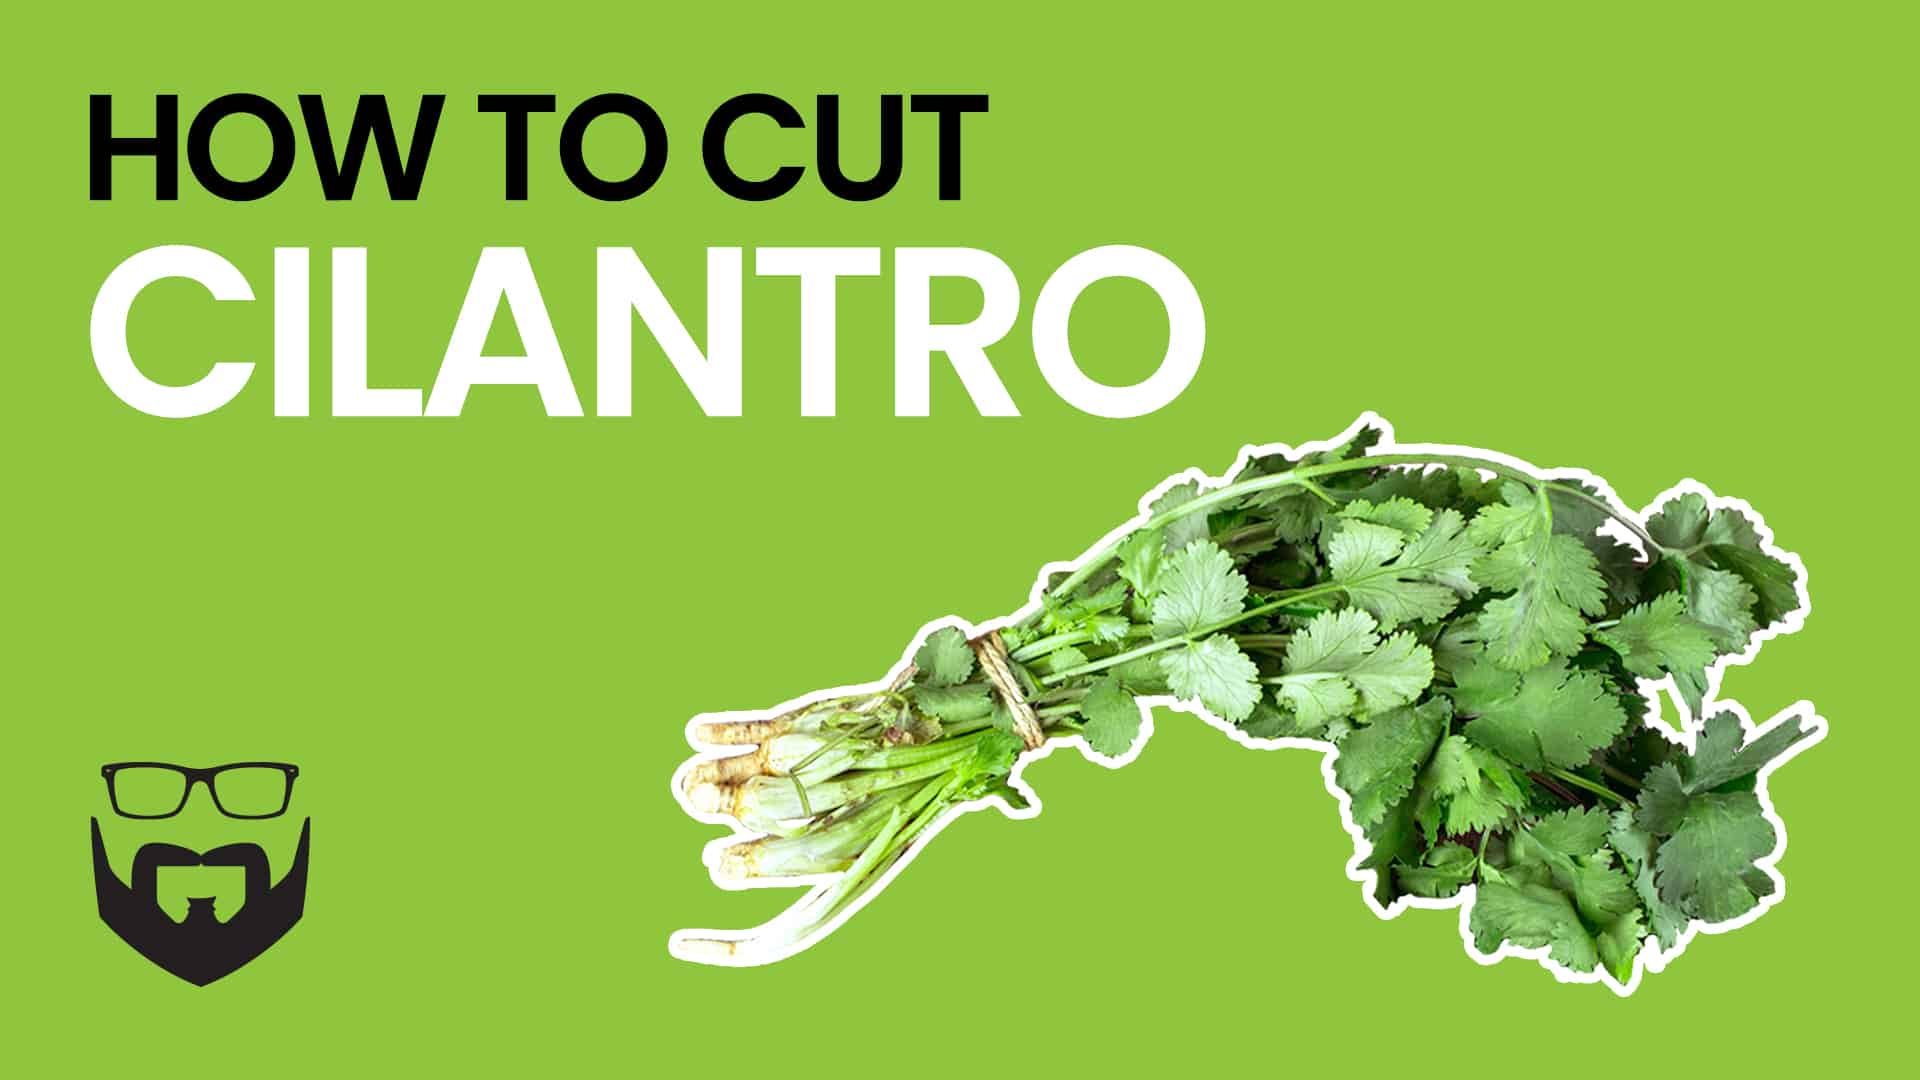 How to Cut Cilantro Video - Green